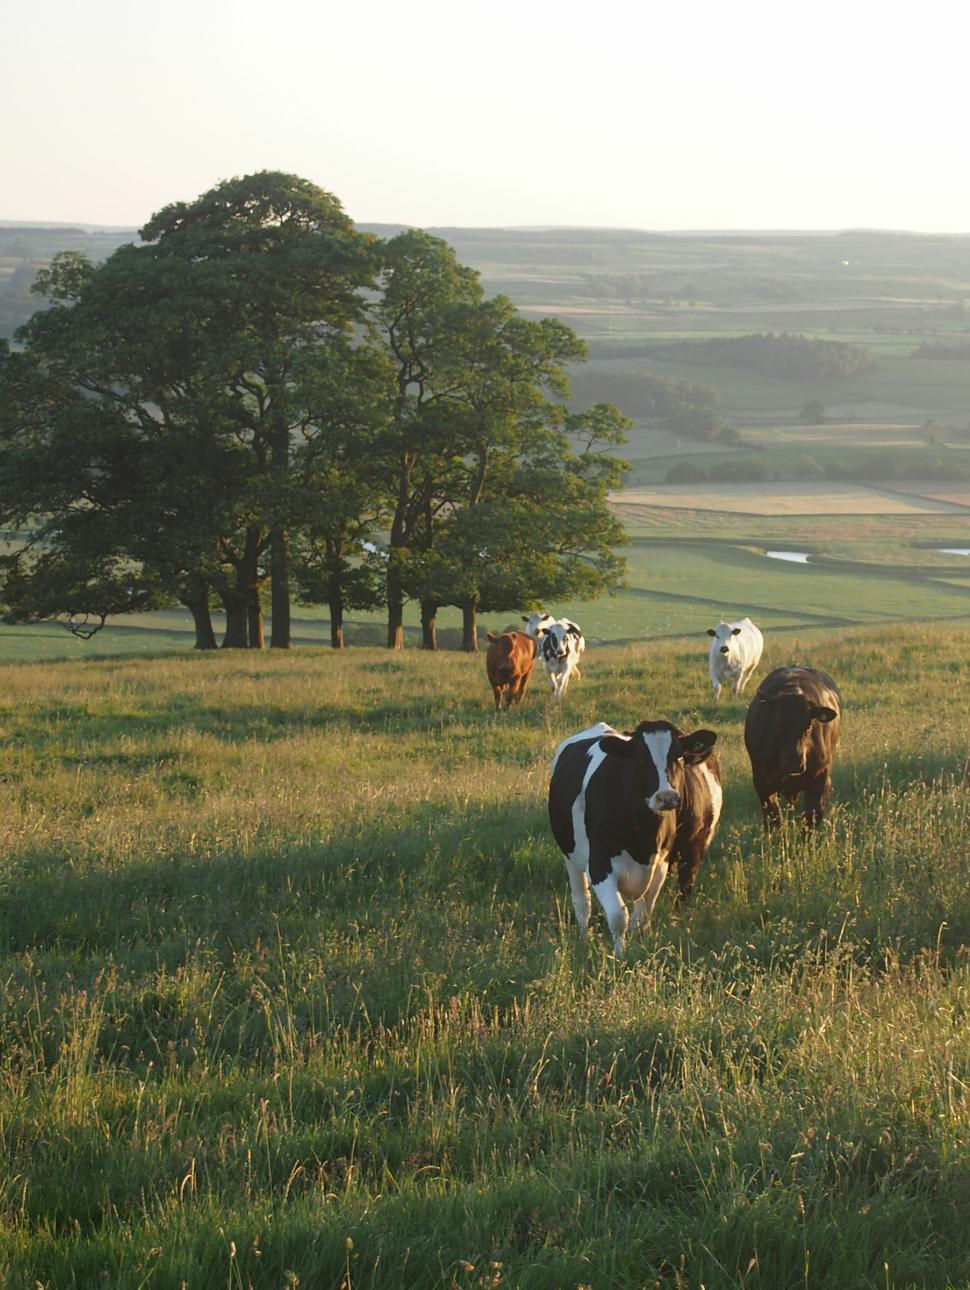 A herd of cows walking towards the photographer in the scenic British countryside.